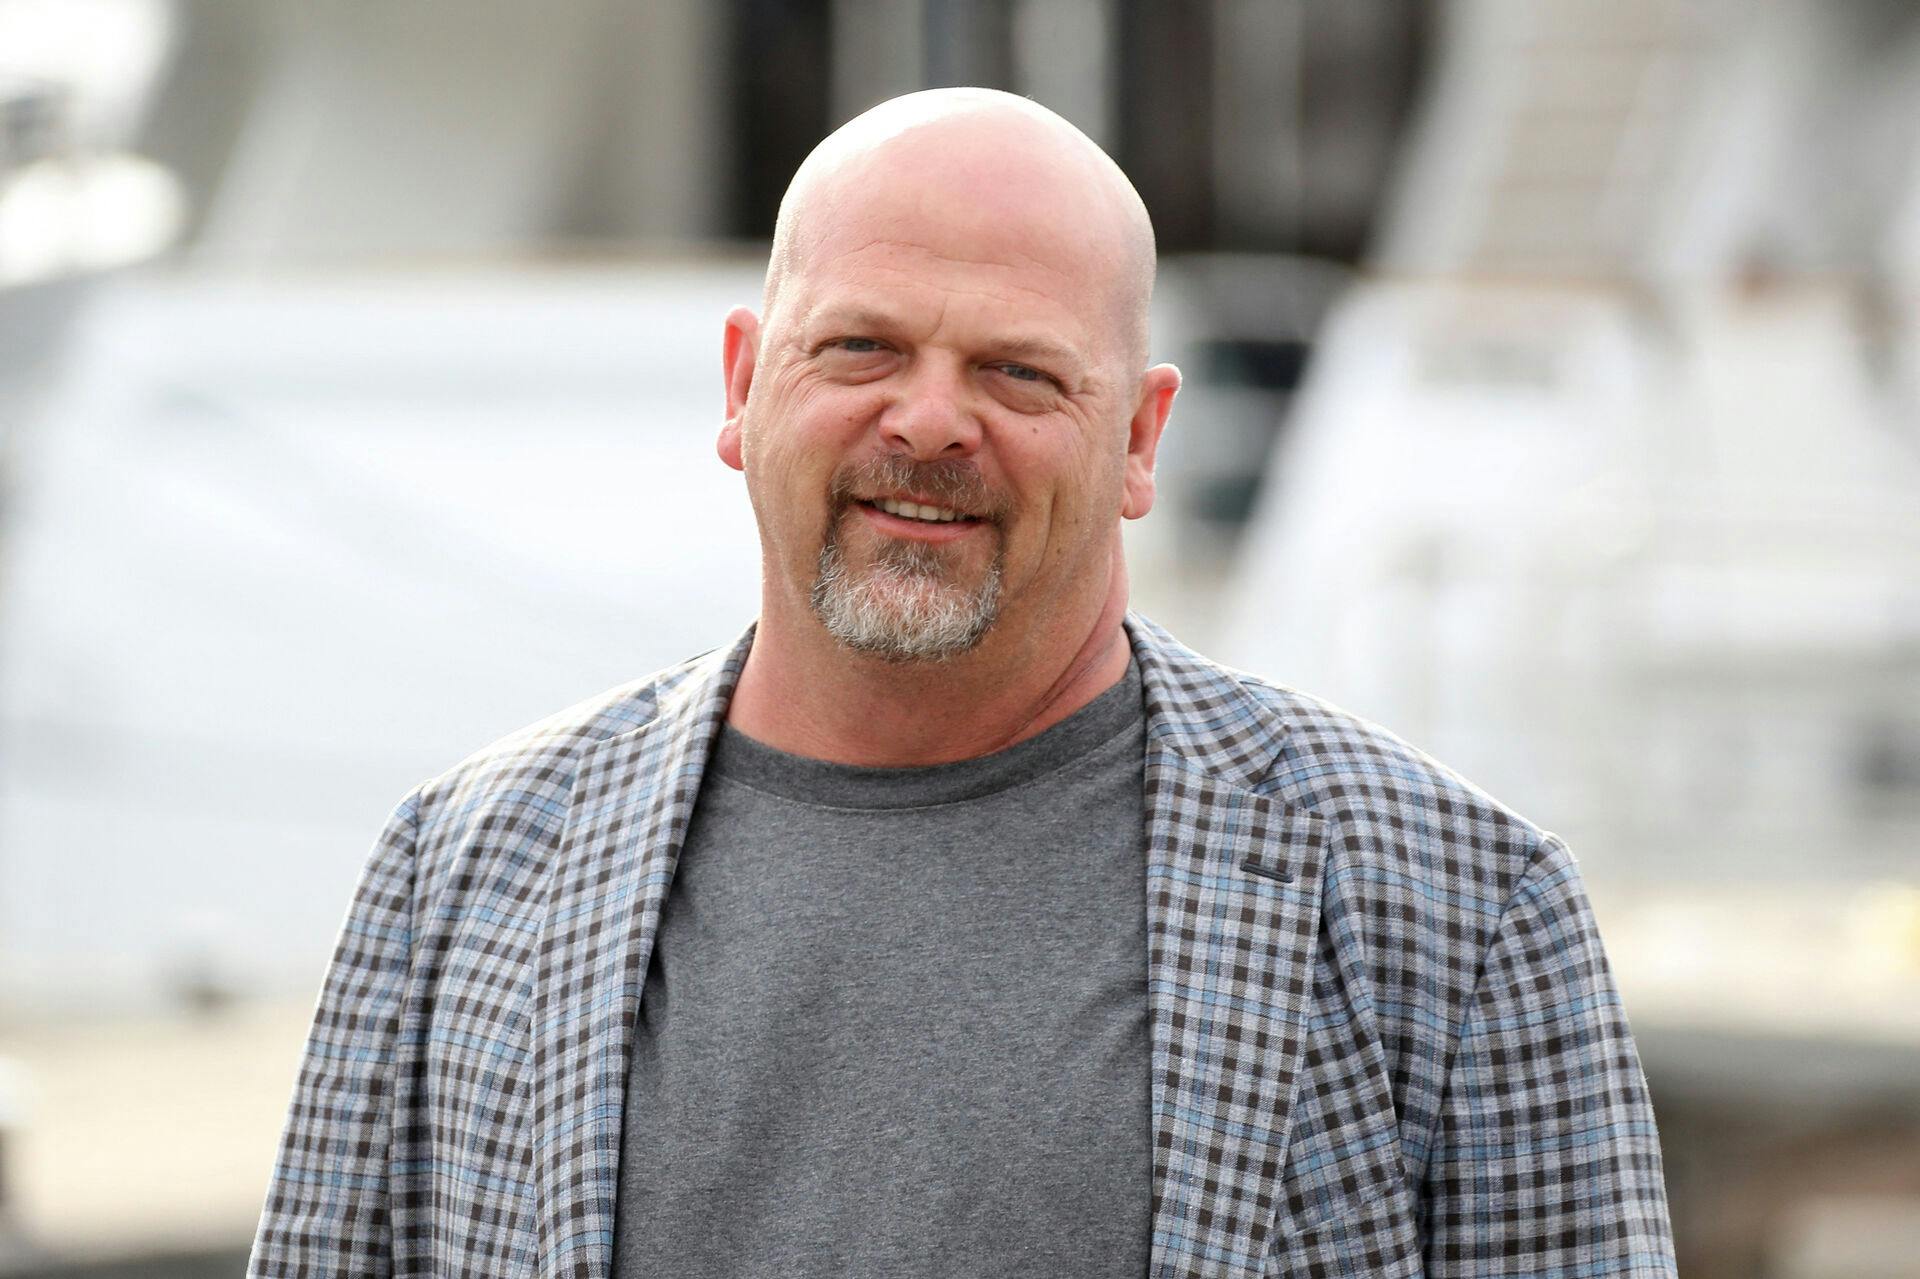 US businessman and reality television personality Rick Harrison poses during a photocall for the TV serie "Pawn Stars" as part of the MIPCOM (The world's entertainment content market), on October 17, 2016 in Cannes, southeastern France. VALERY HACHE / AFP